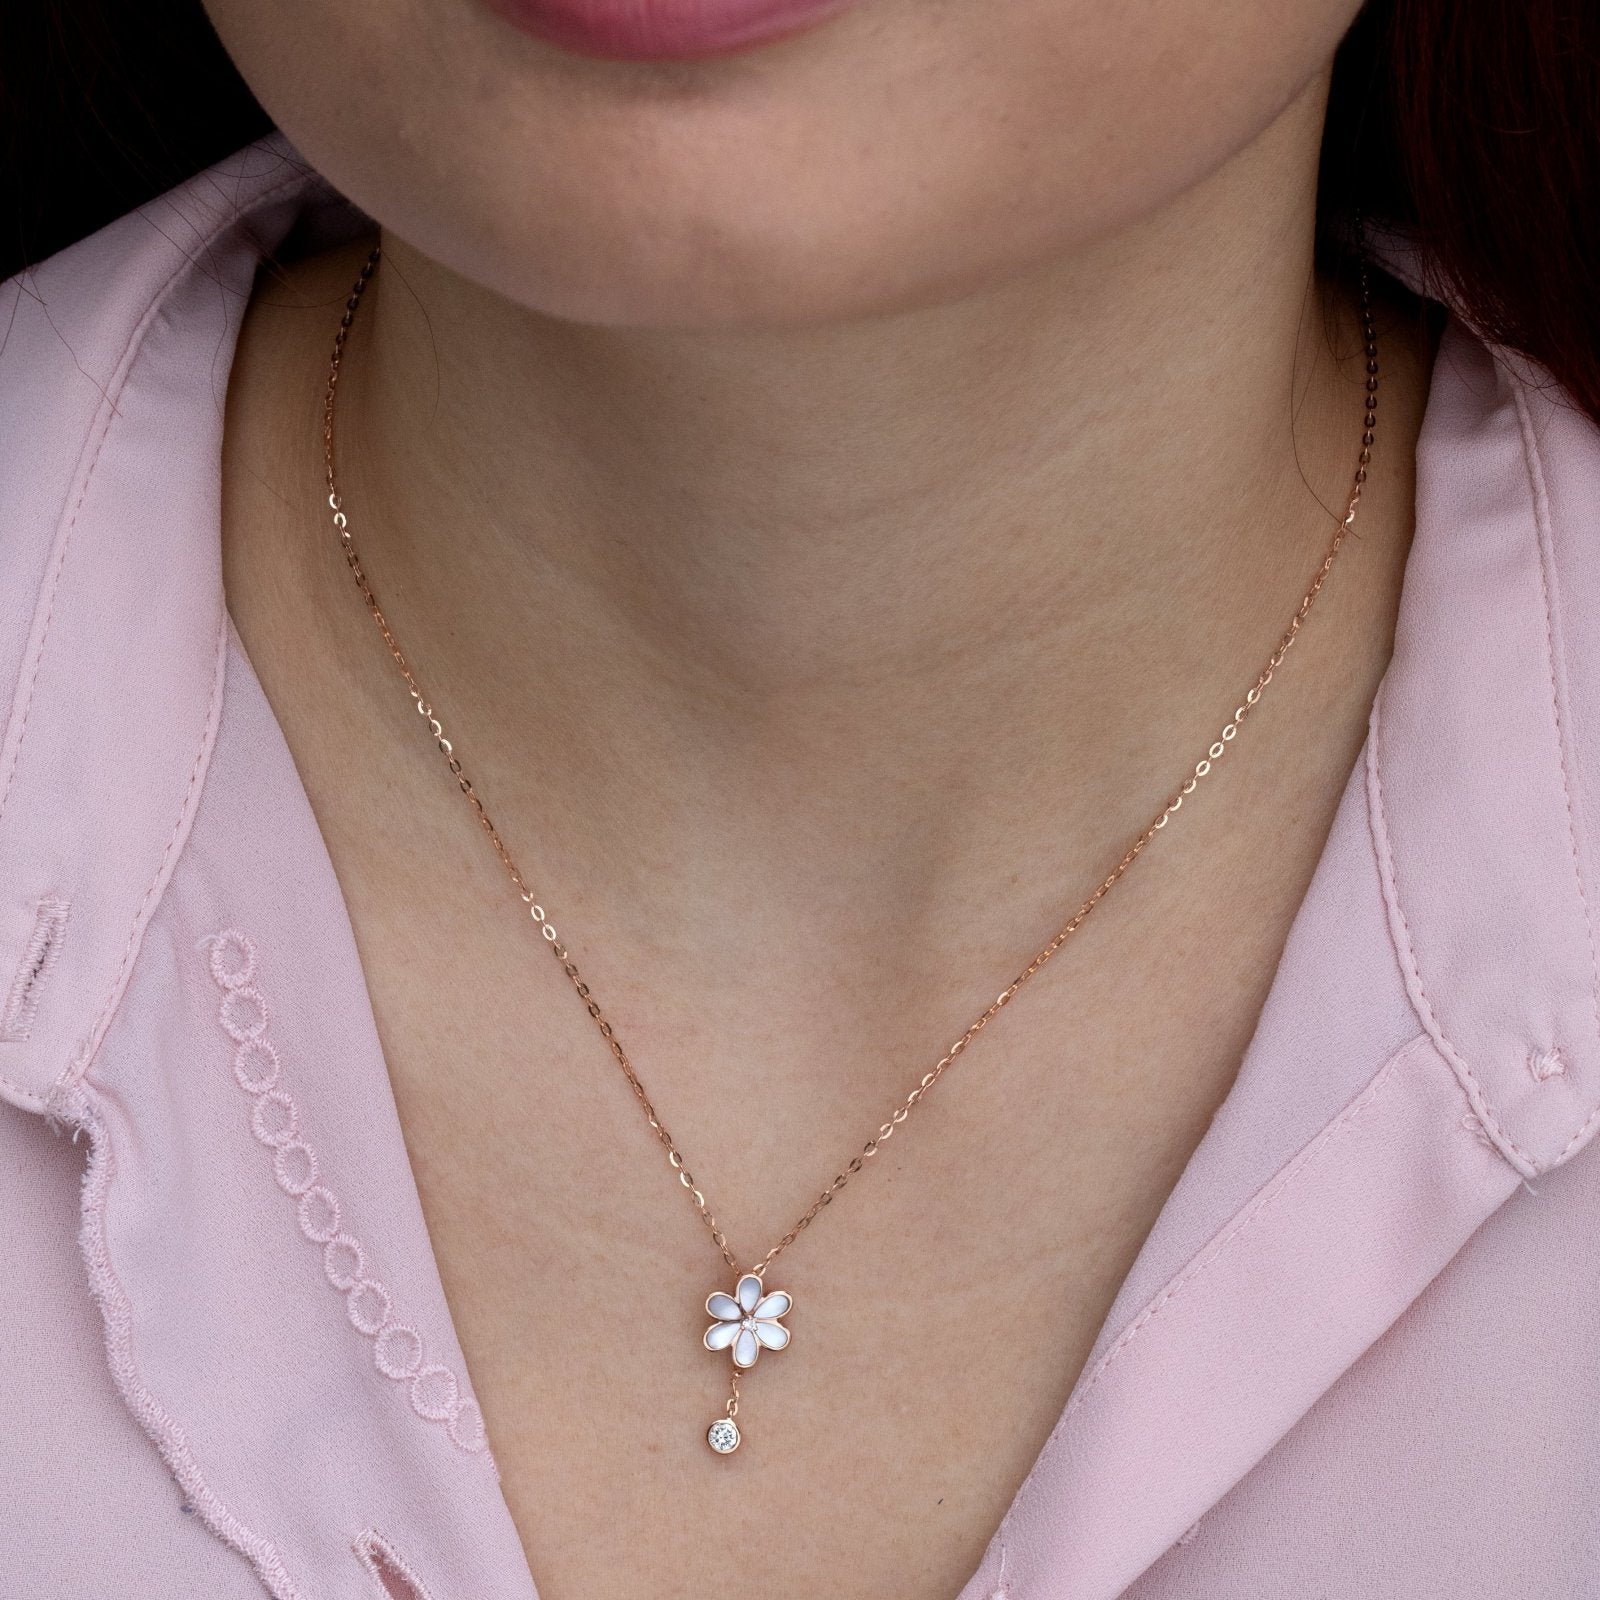 Mother of Pearl Flower and Diamond Drop Lariat Necklace Necklaces Estella Collection #product_description# 14k Birthstone Diamond #tag4# #tag5# #tag6# #tag7# #tag8# #tag9# #tag10#